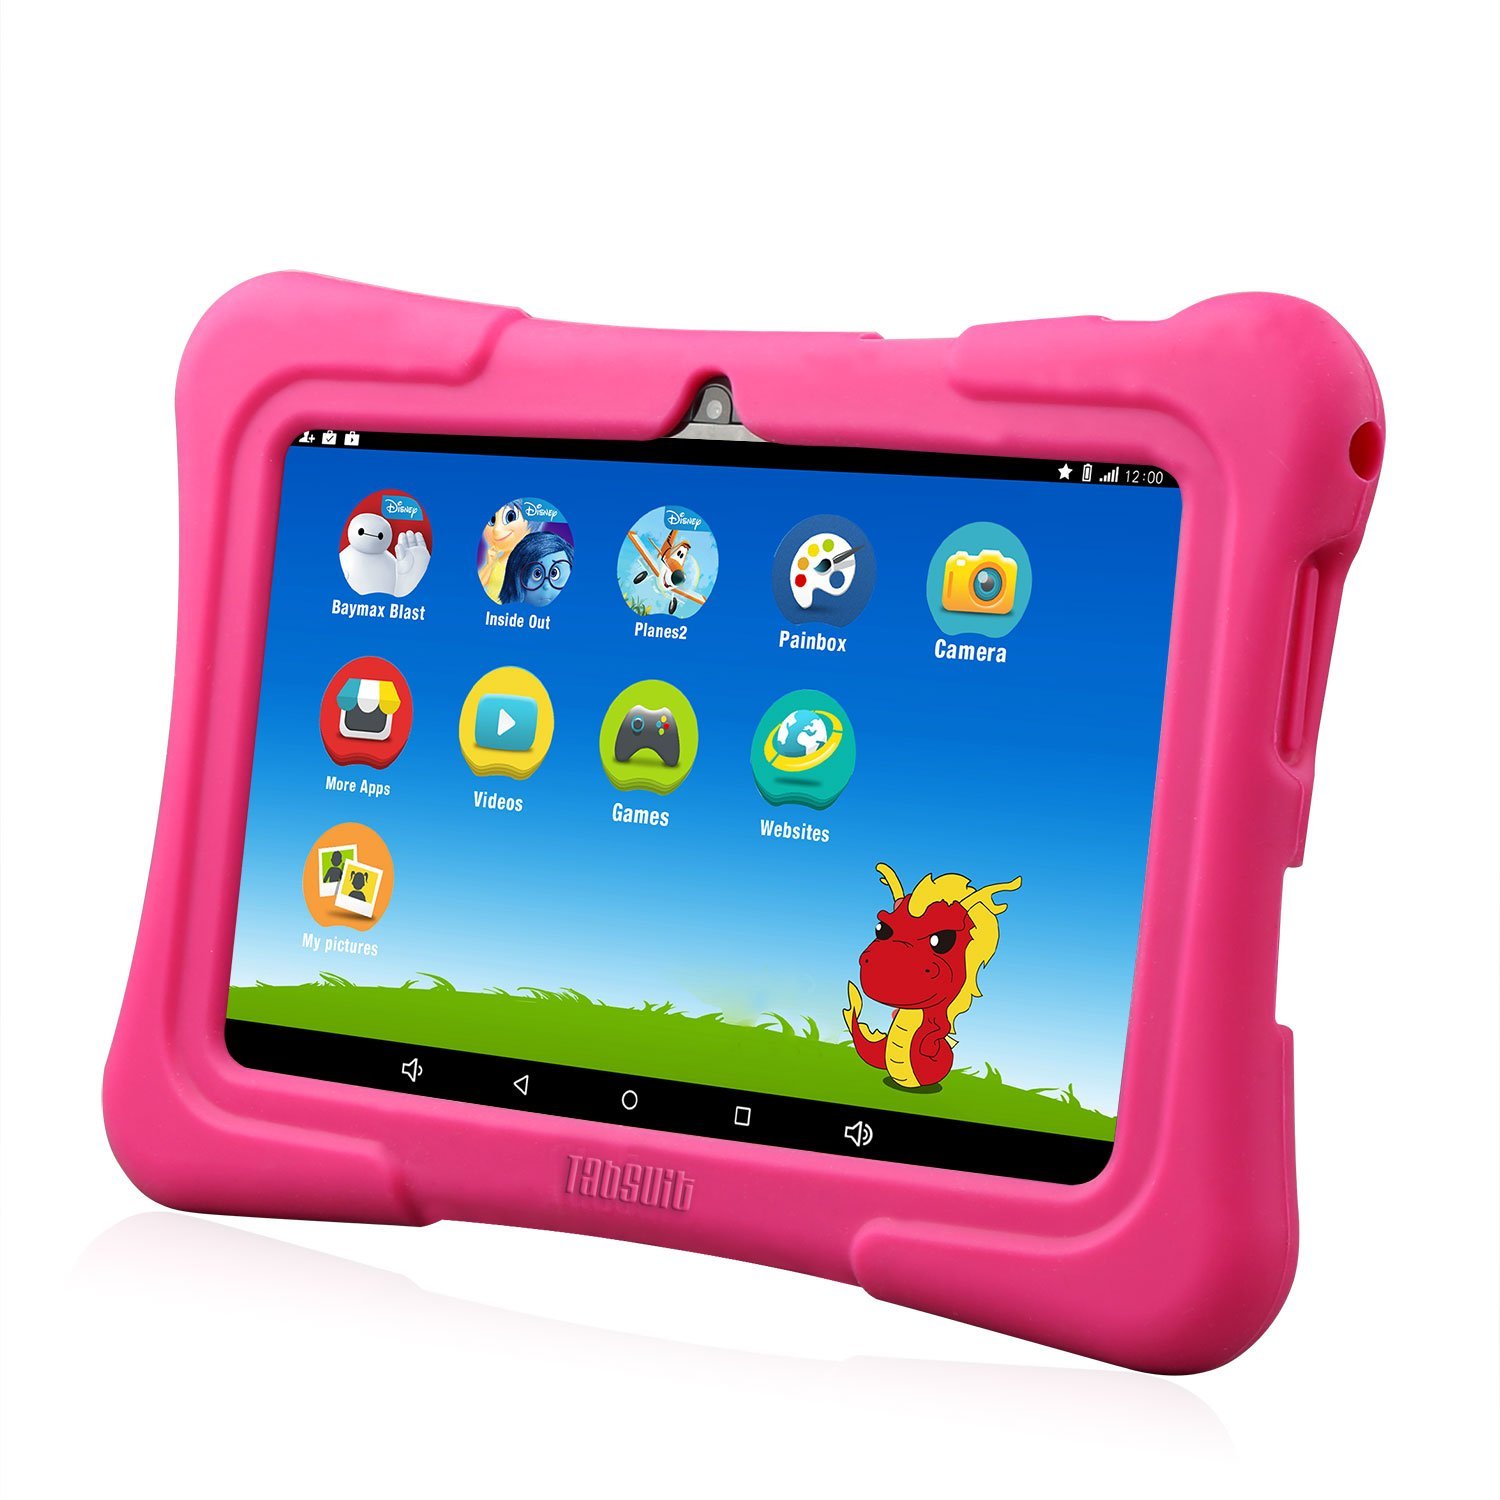 The New Sophisticated Kids E-tablet - Science/Technology - Nigeria